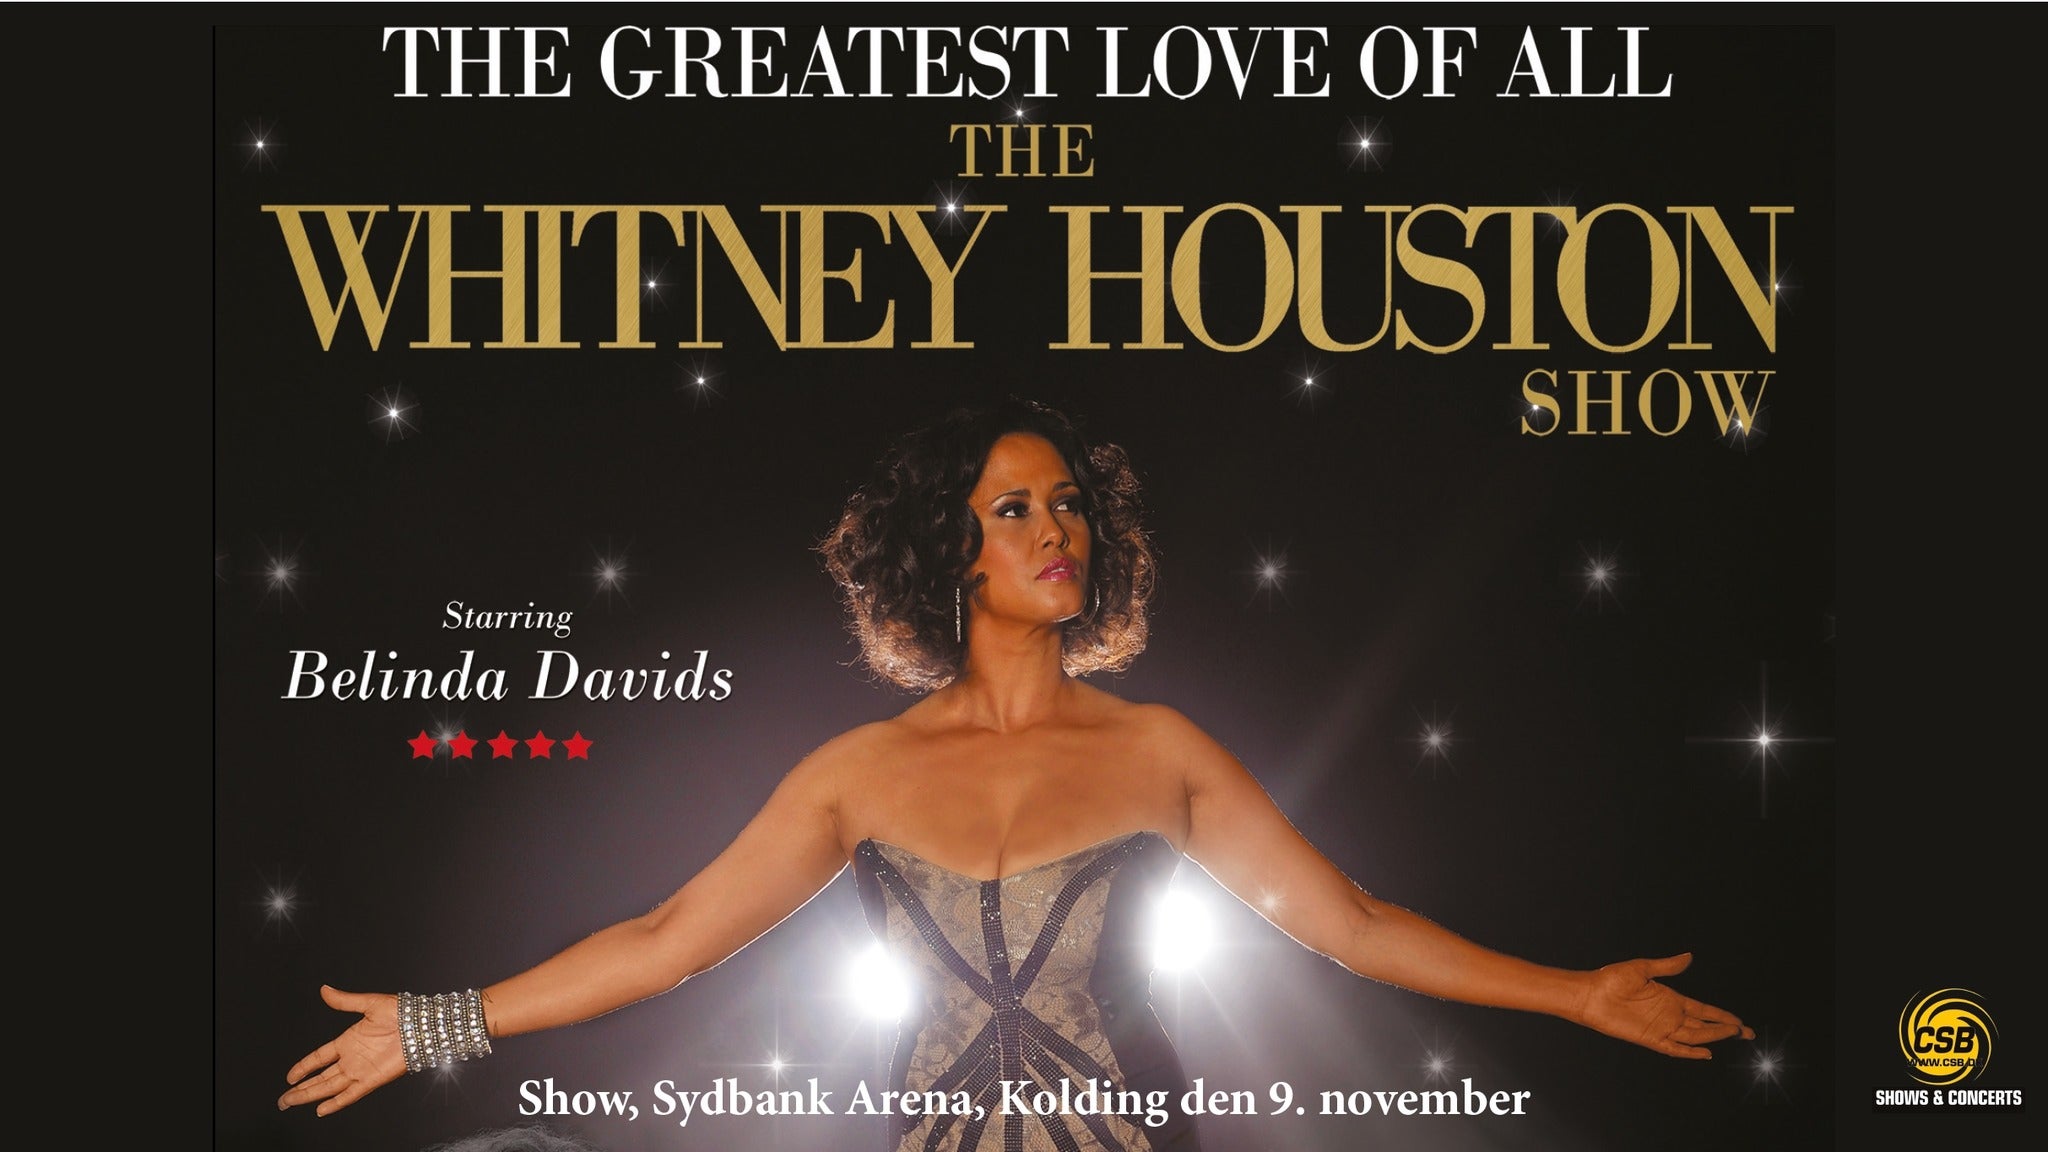 The Whitney Houston Show Tickets Event Dates & Schedule